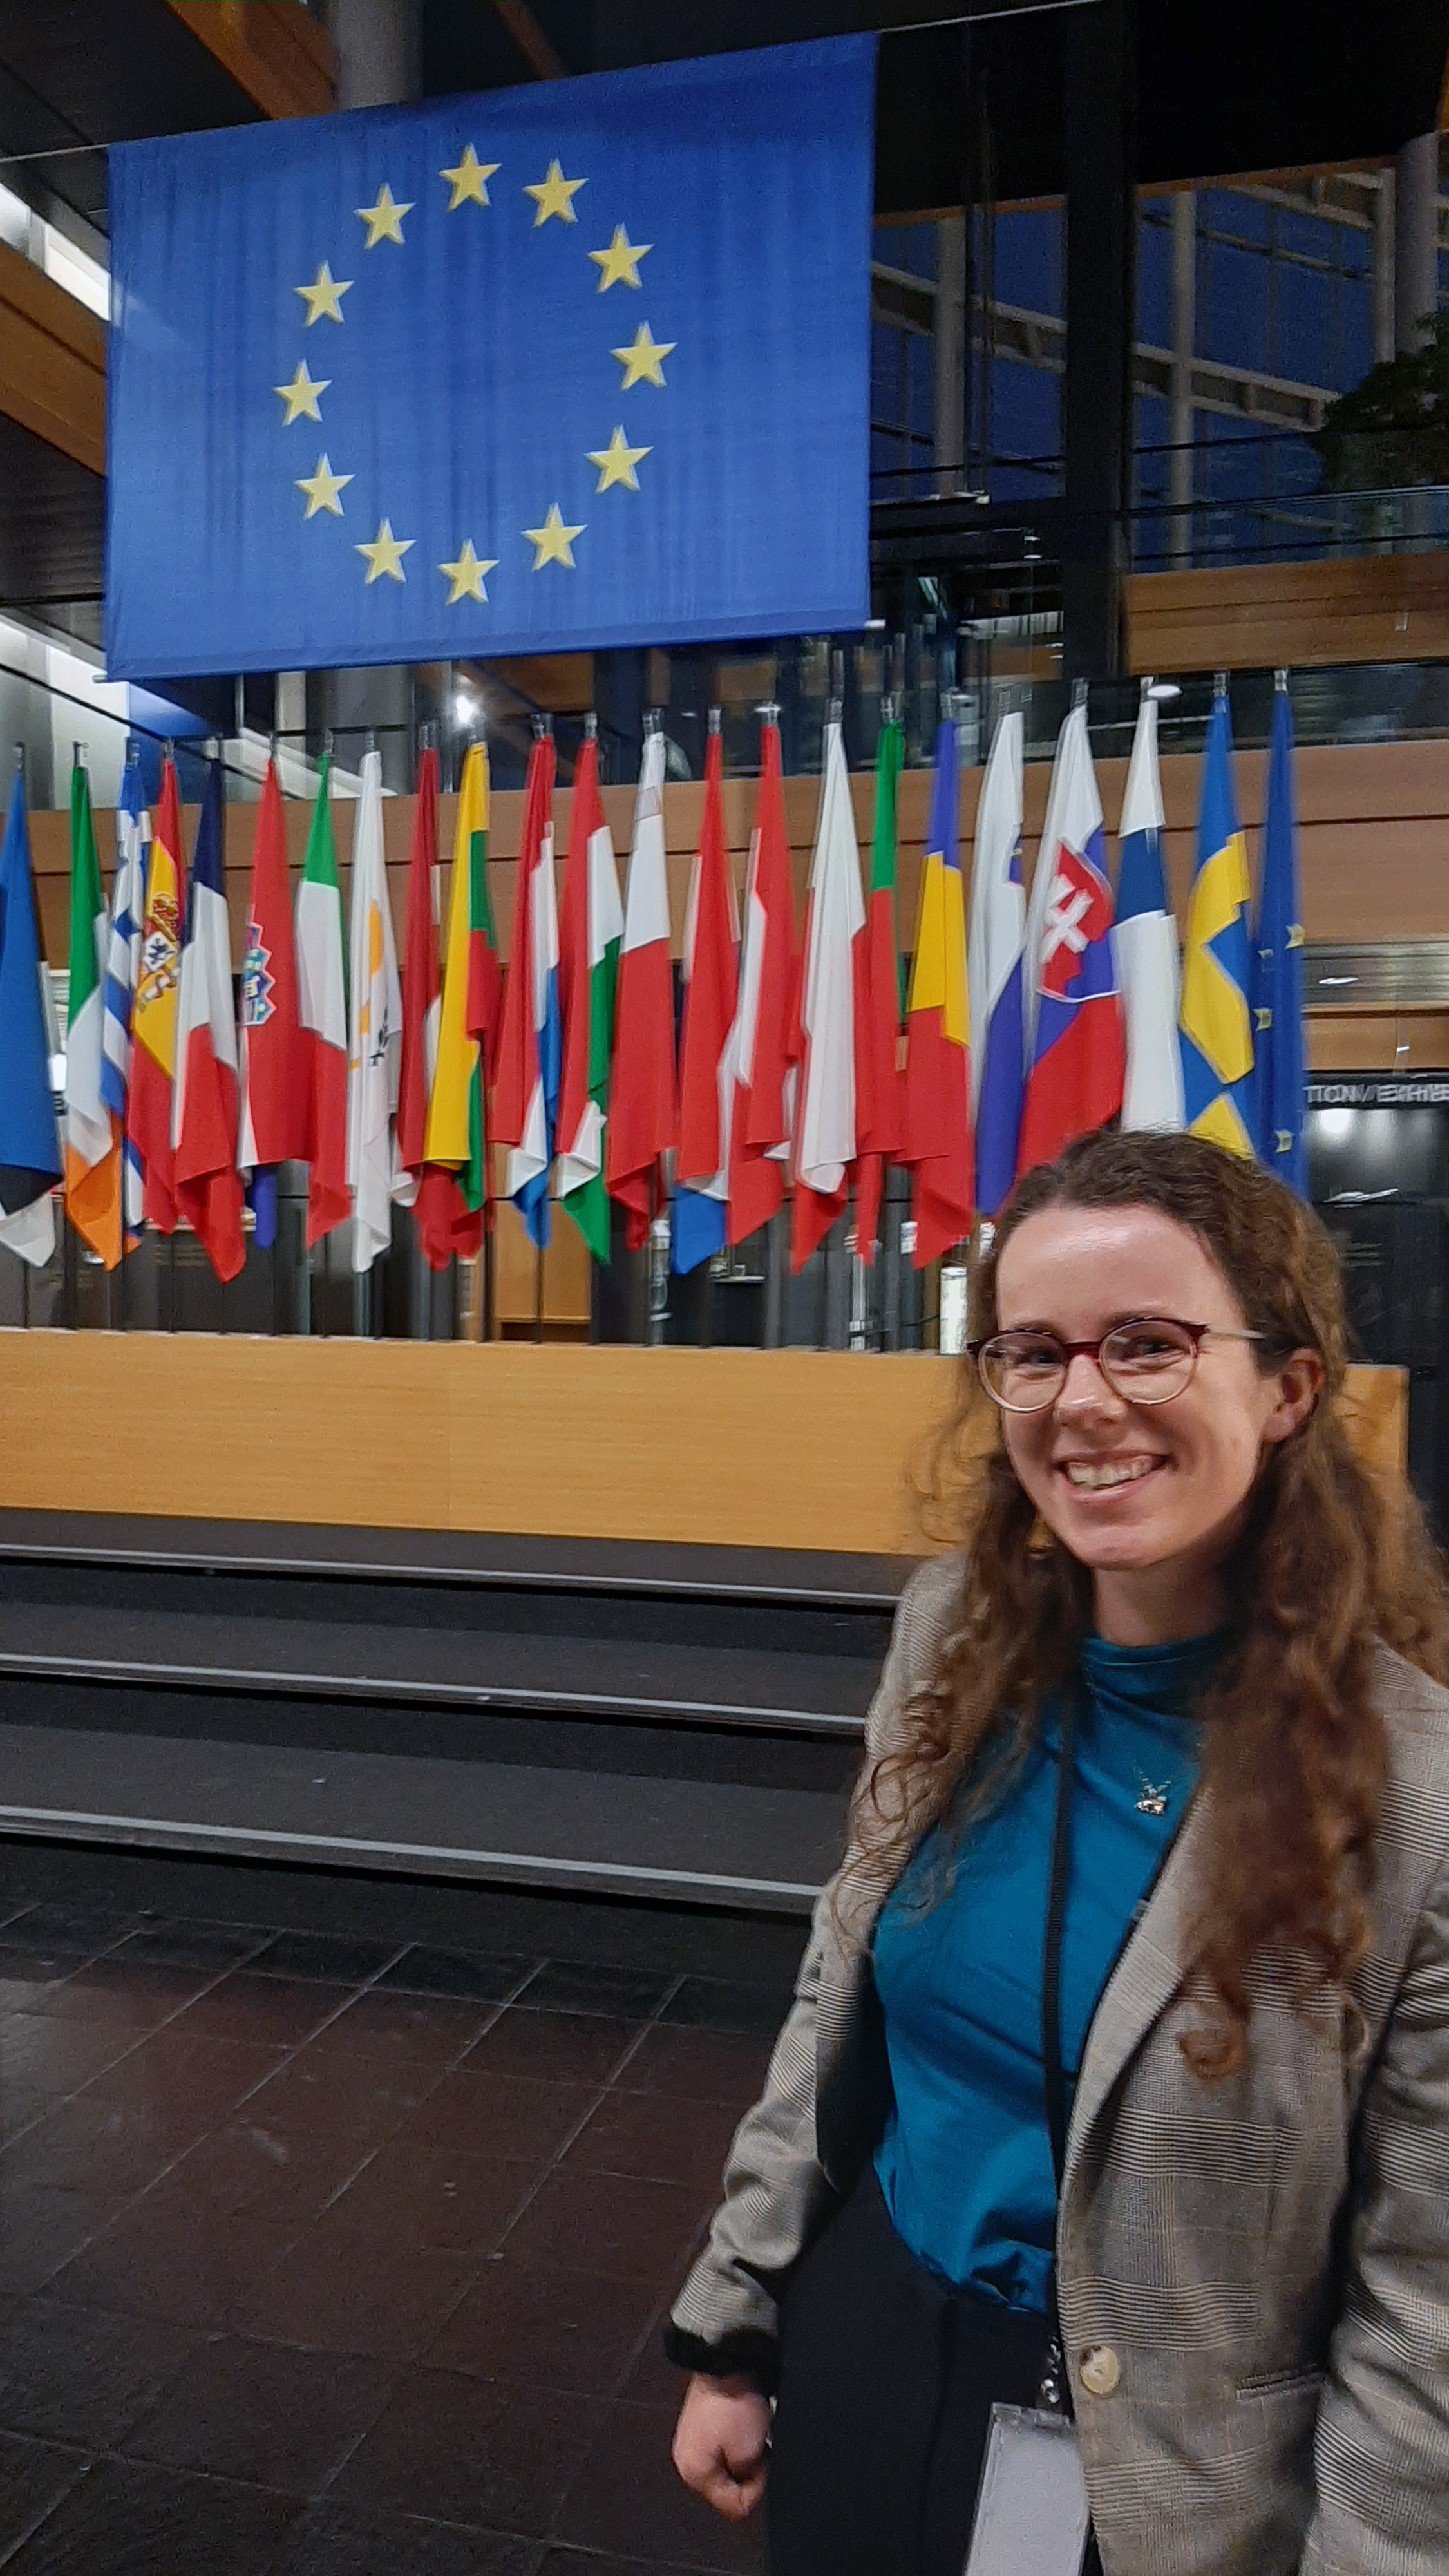 A woman standing in front of the EU and several country flags